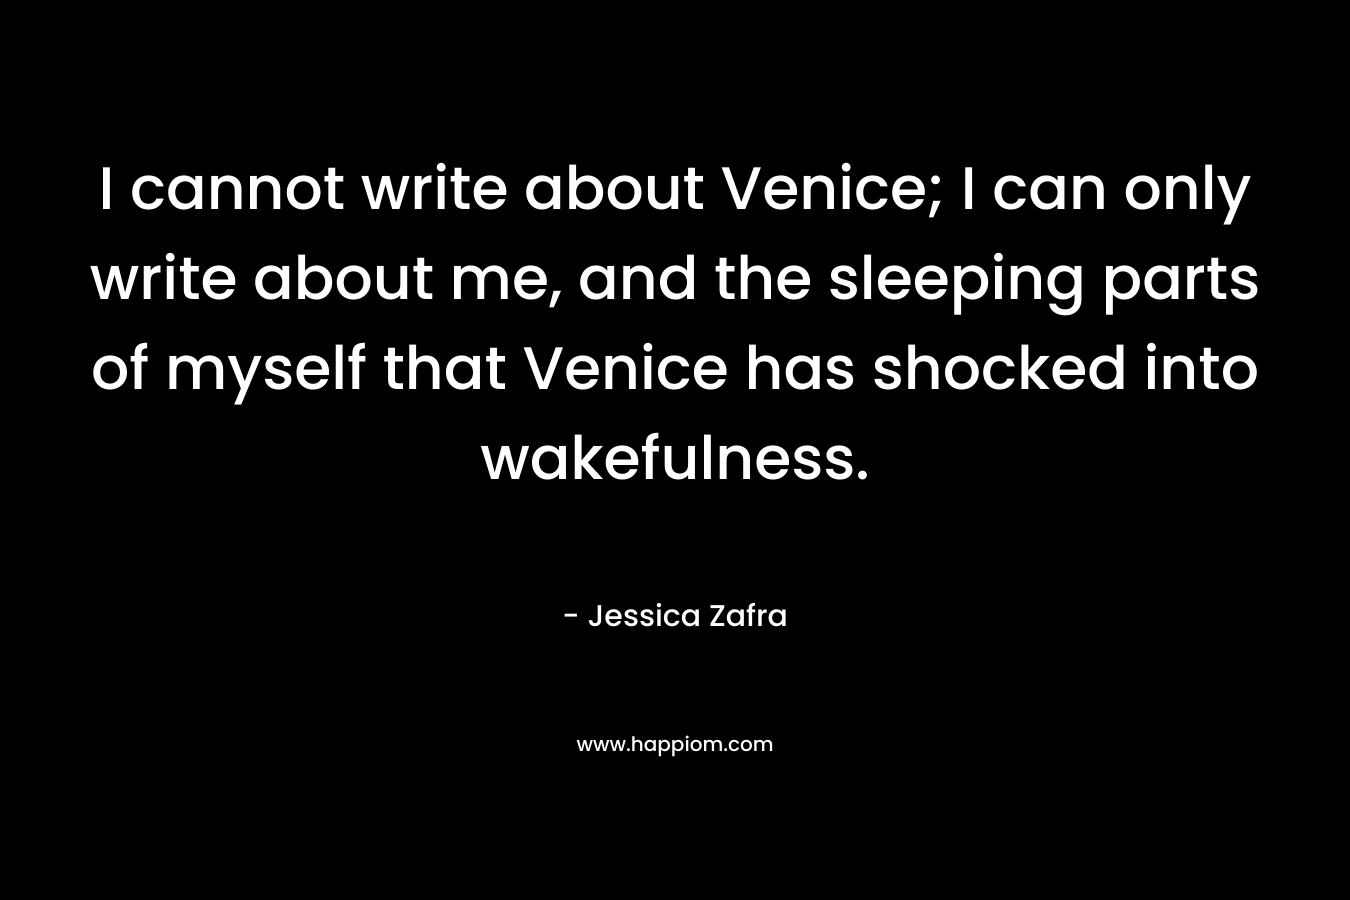 I cannot write about Venice; I can only write about me, and the sleeping parts of myself that Venice has shocked into wakefulness. – Jessica Zafra